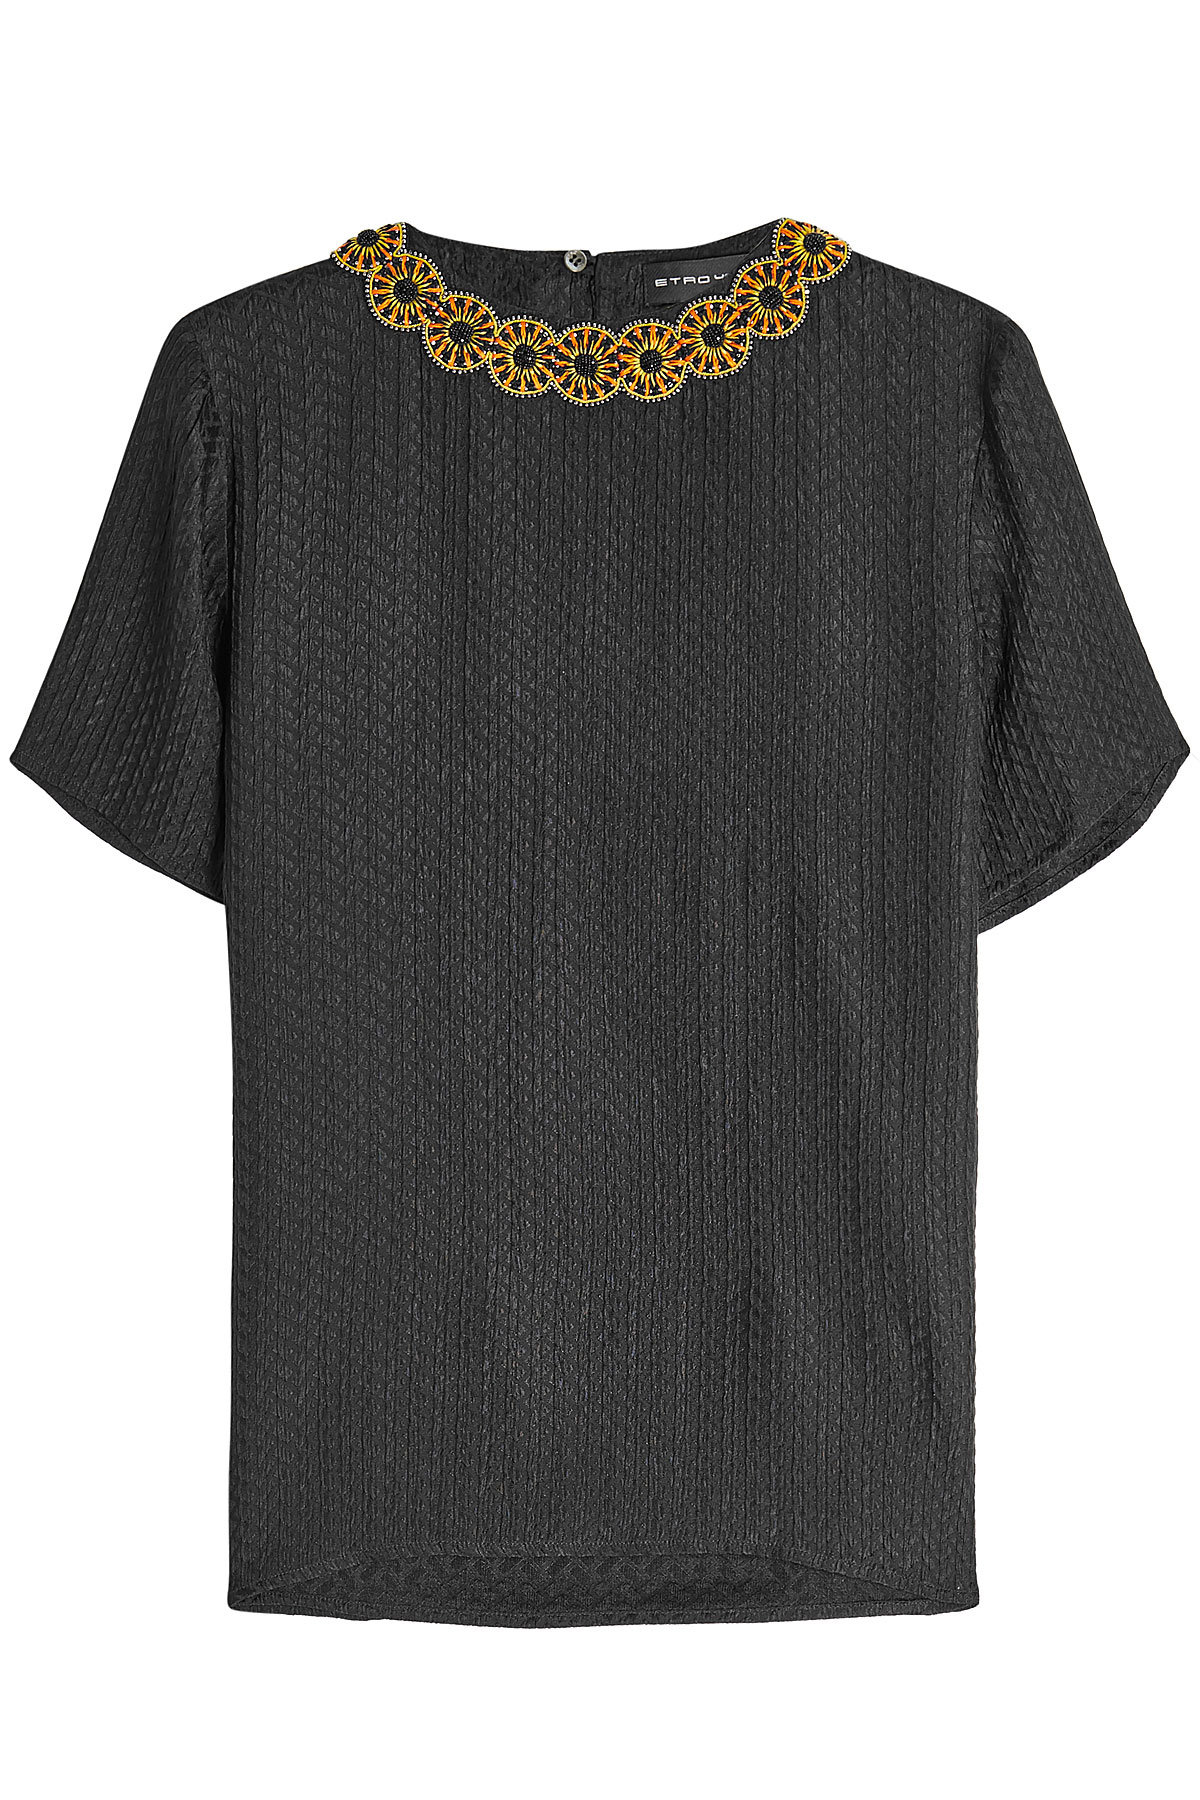 Etro - Embroidered and Embellished Top with Silk